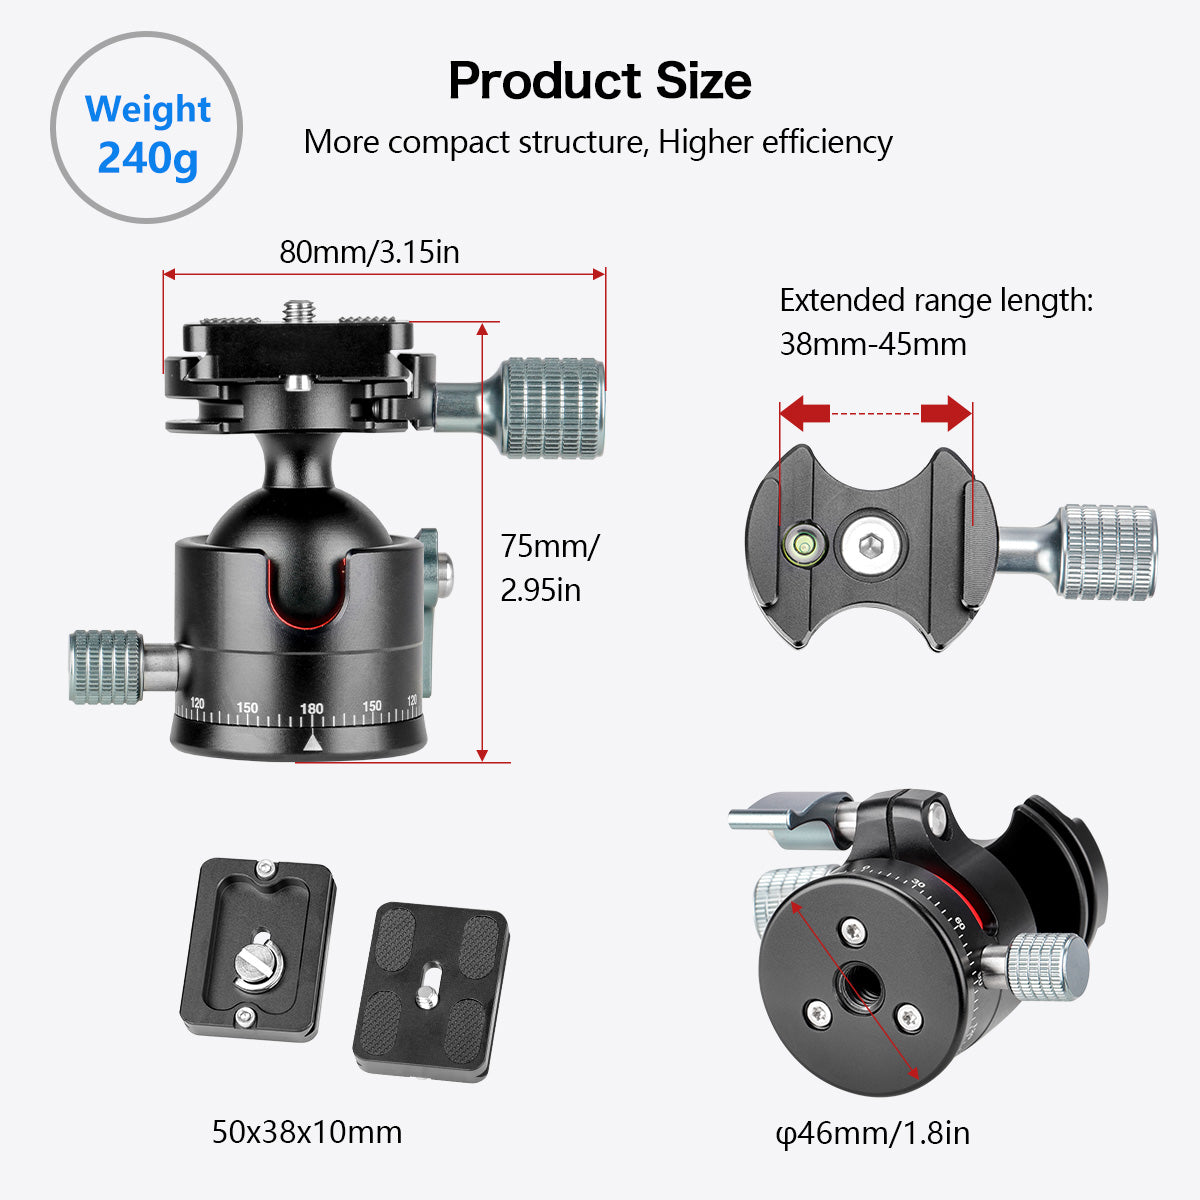 Low Profile Ball Head, Φ36mm Ball Diameter All Metal Tripod Head with 1/4" Screw Arca Swiss Quick Release Plates for DSLR Cameras Tripods Monopods, Max Load 33lbs/15kg